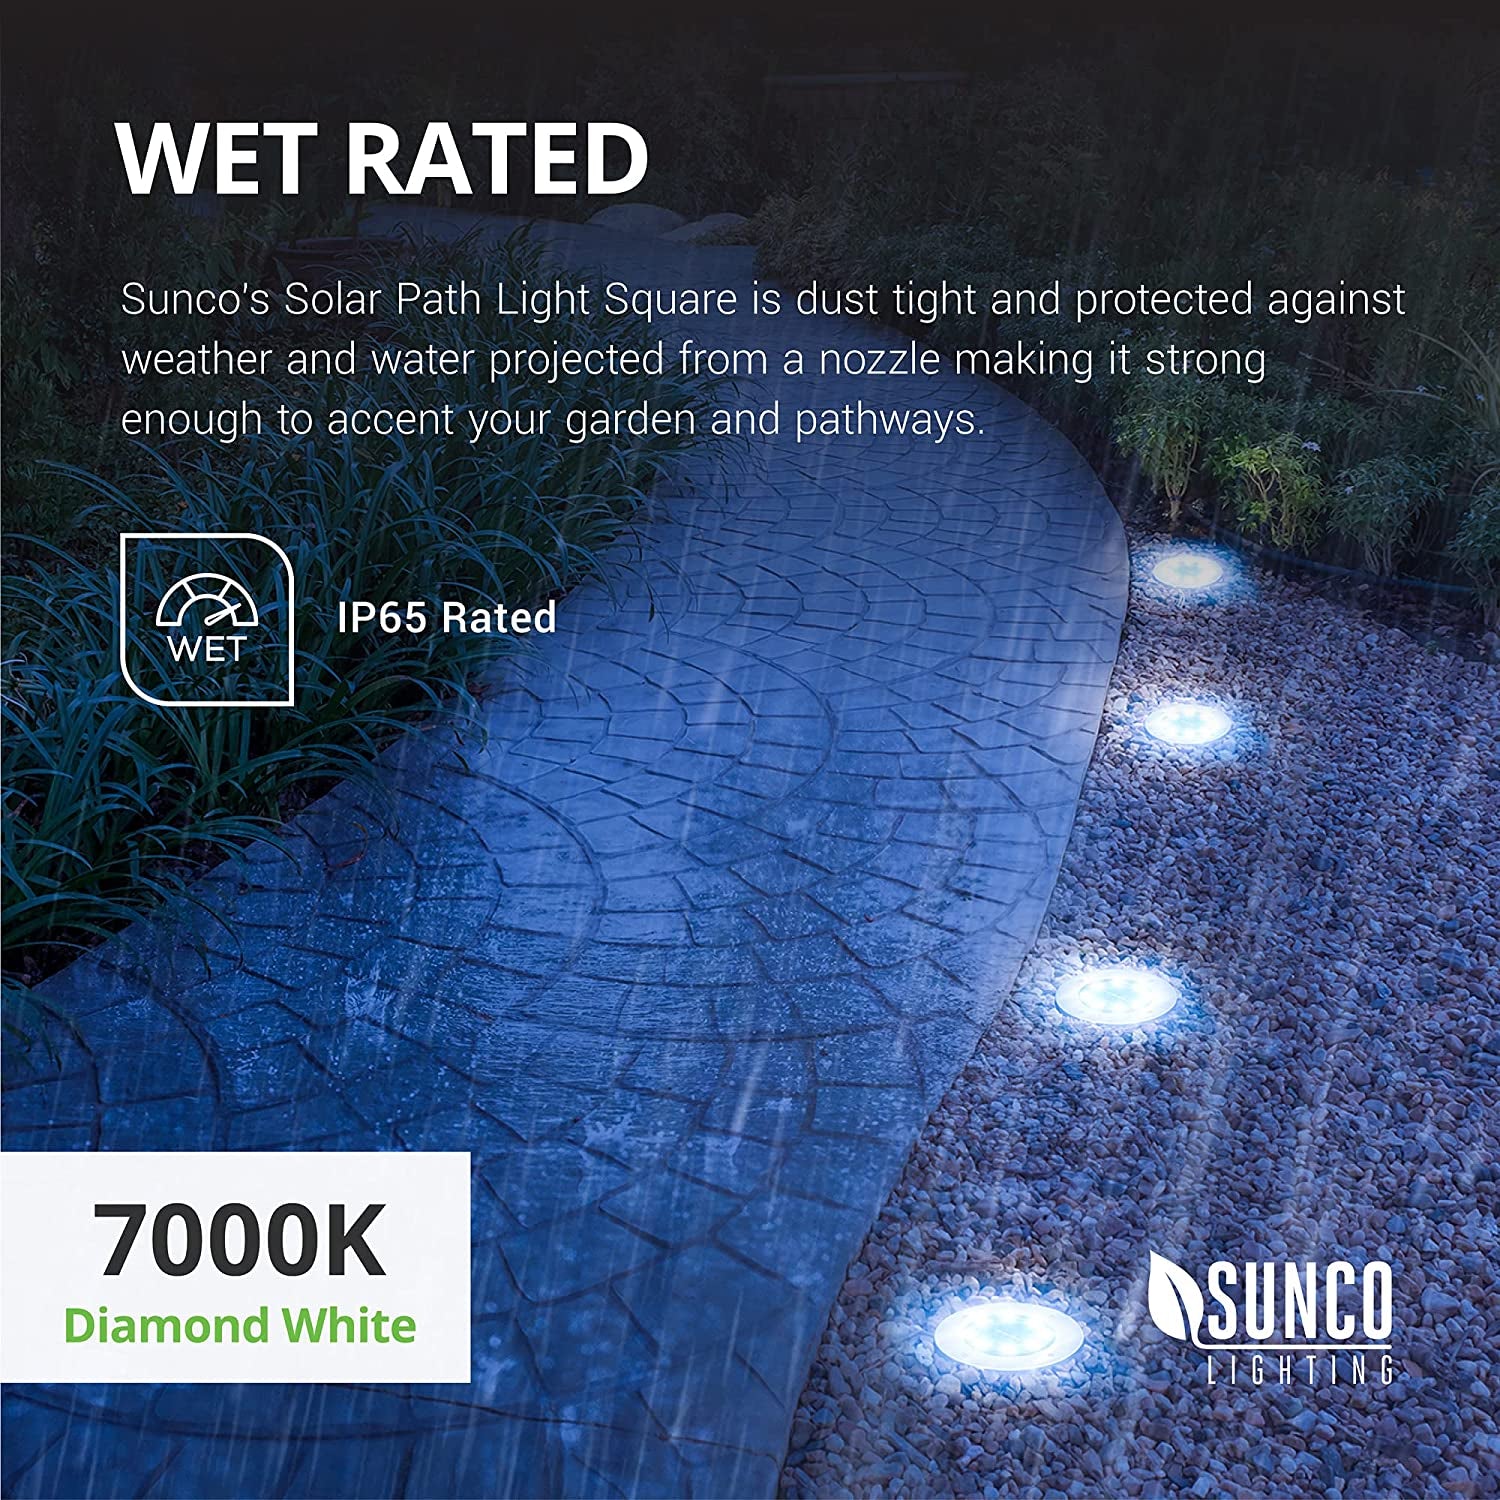 12 Count (Pack of 1) Solar Lights Outdoor Garden LED, Waterproof Landscape Pathway Light Fixture, Dusk to Dawn, Yard Patio Ground Lights, Deck, Cross Spike Stake, 7000K Diamond White